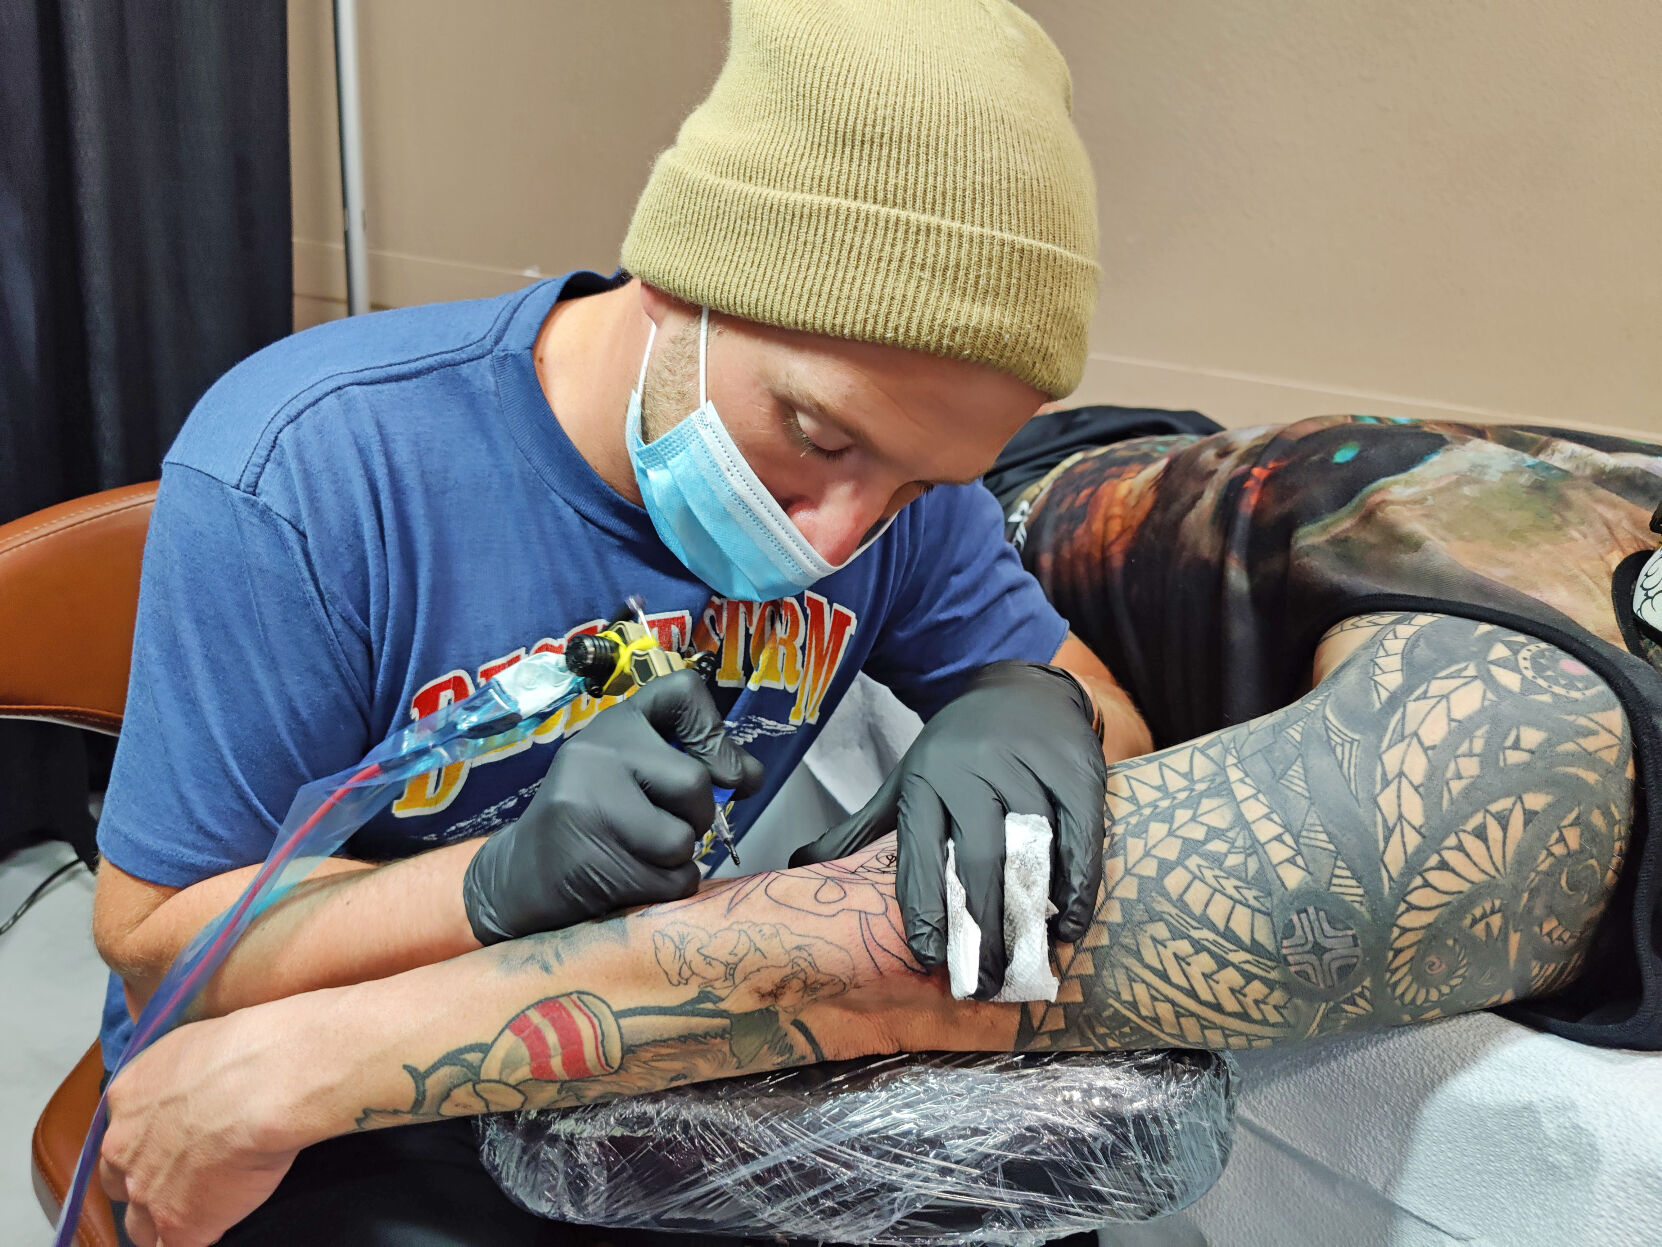 Ink Attracts Thousands To Detroit For Tattoo Expo  CBS Detroit